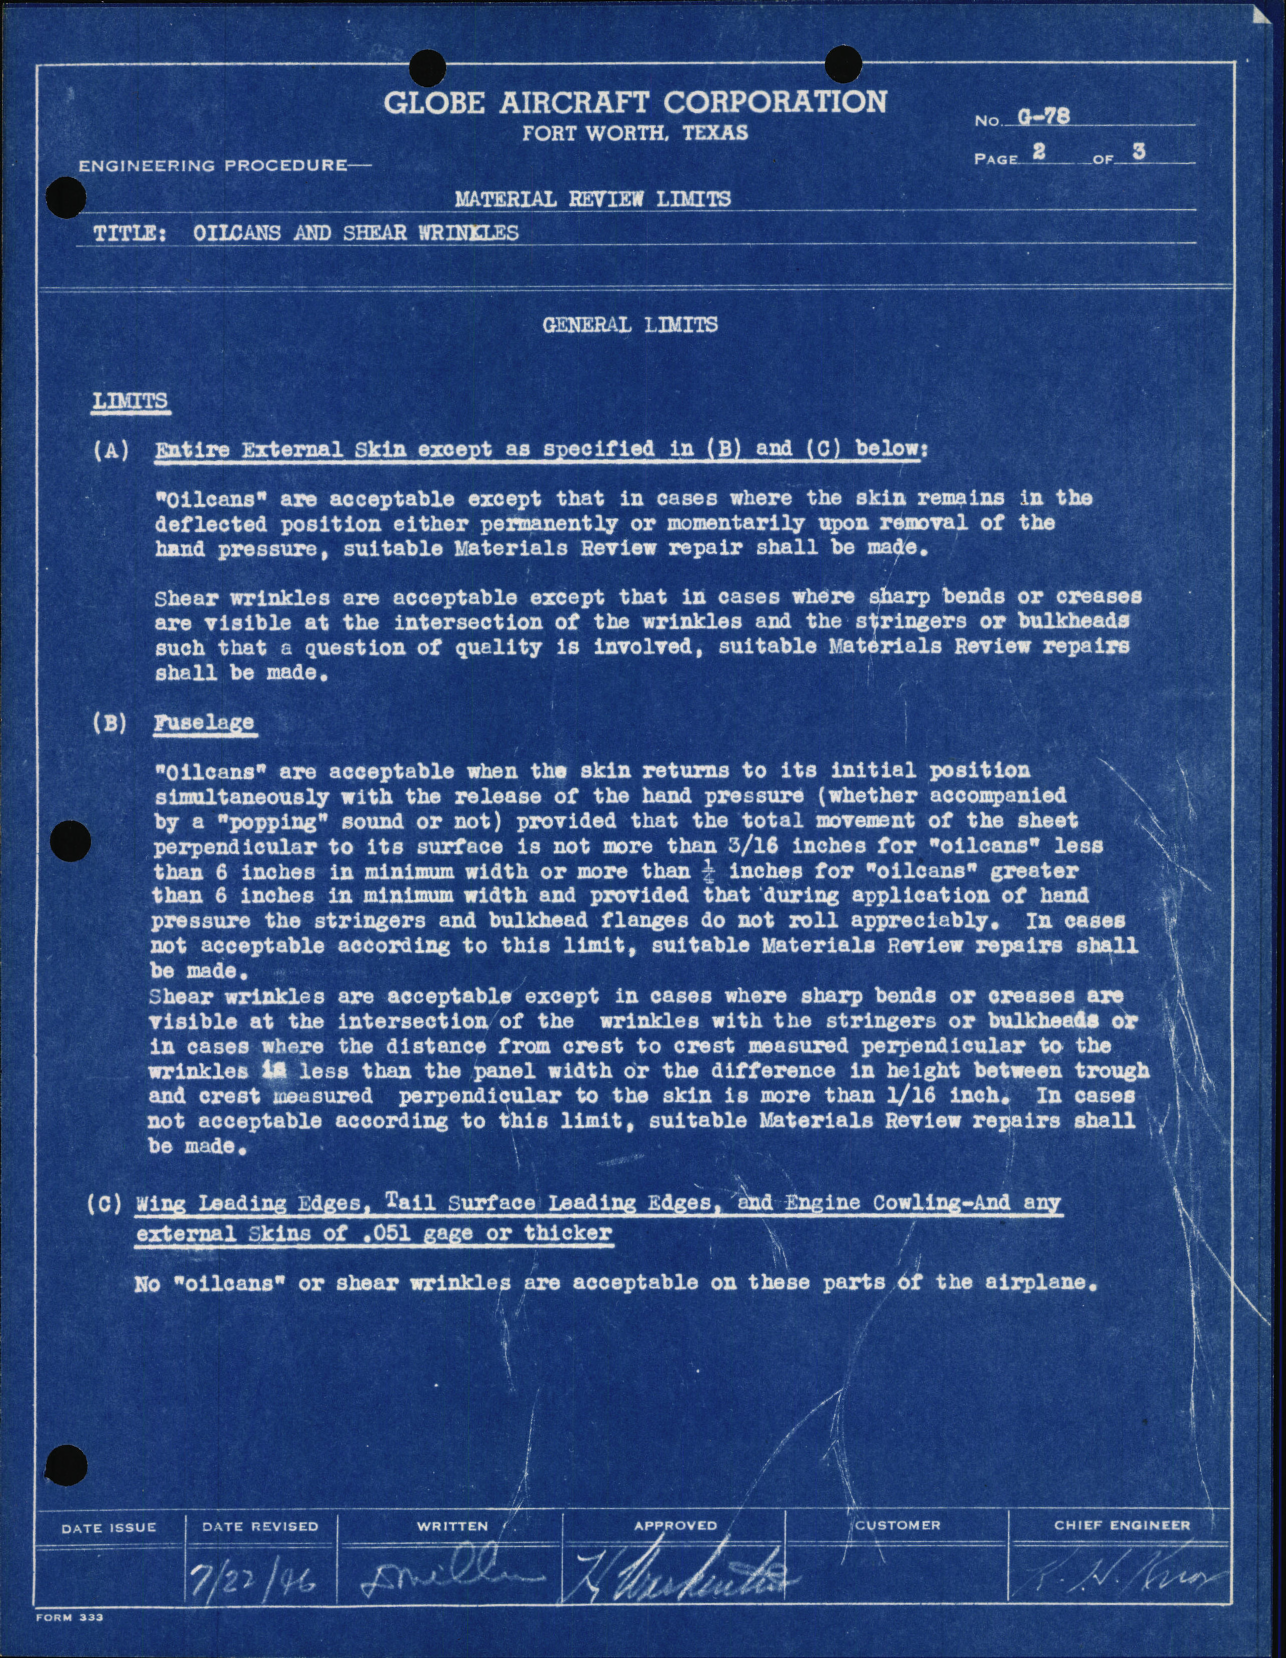 Sample page 5 from AirCorps Library document: Material Review Limits